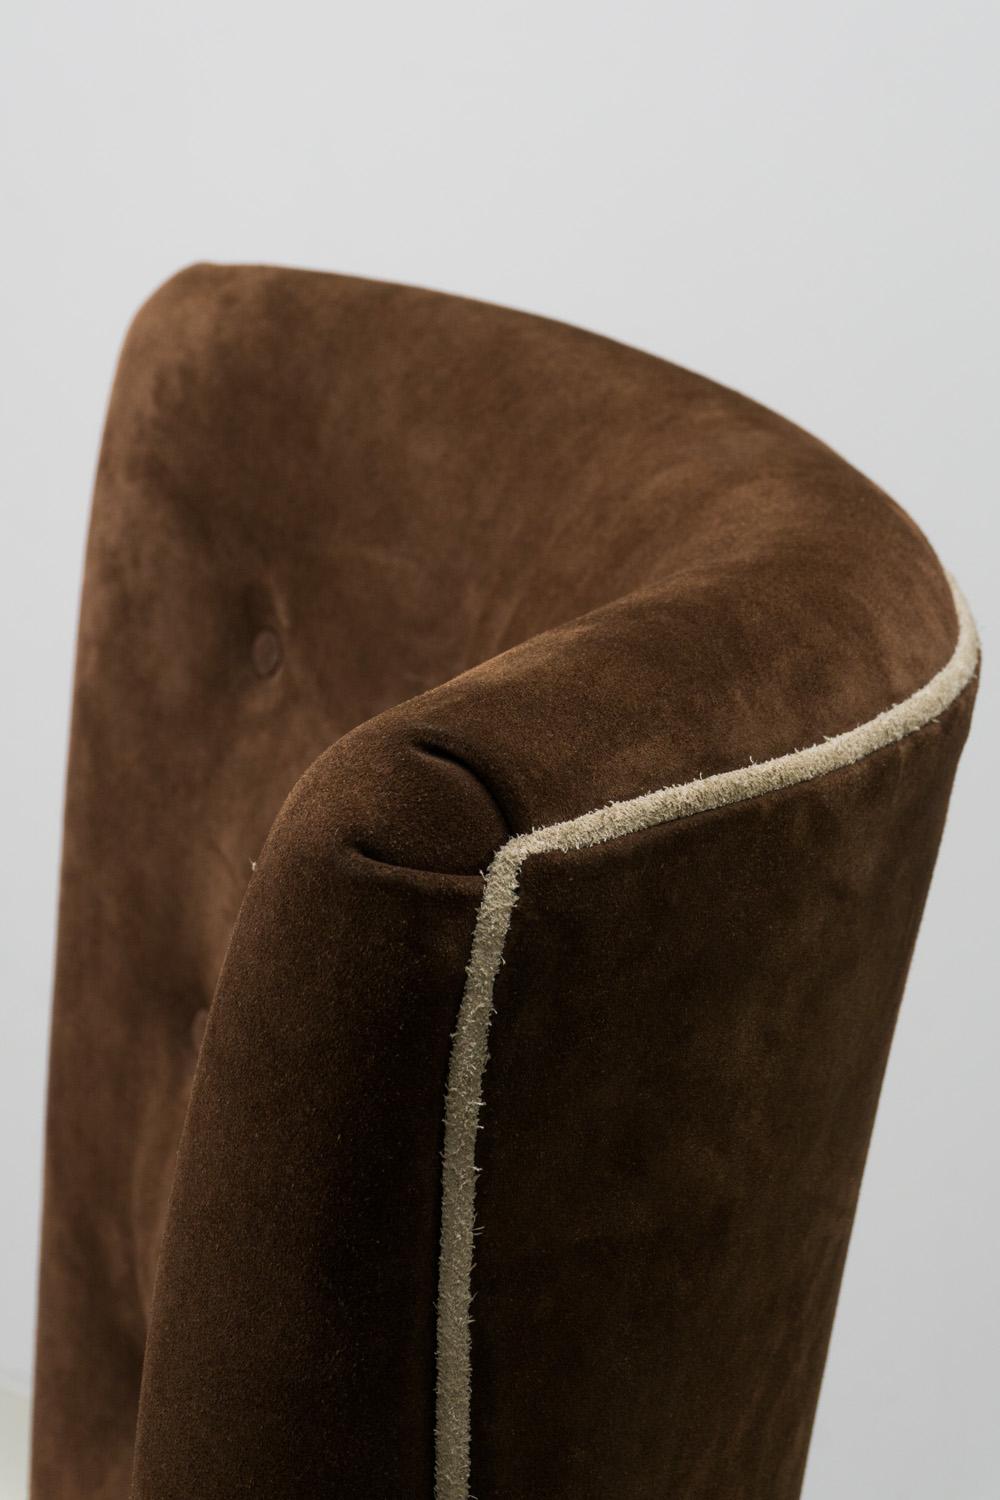 Pair of Brown Suede Armchairs, Guglielmo Ulrich, 1936 For Sale 6